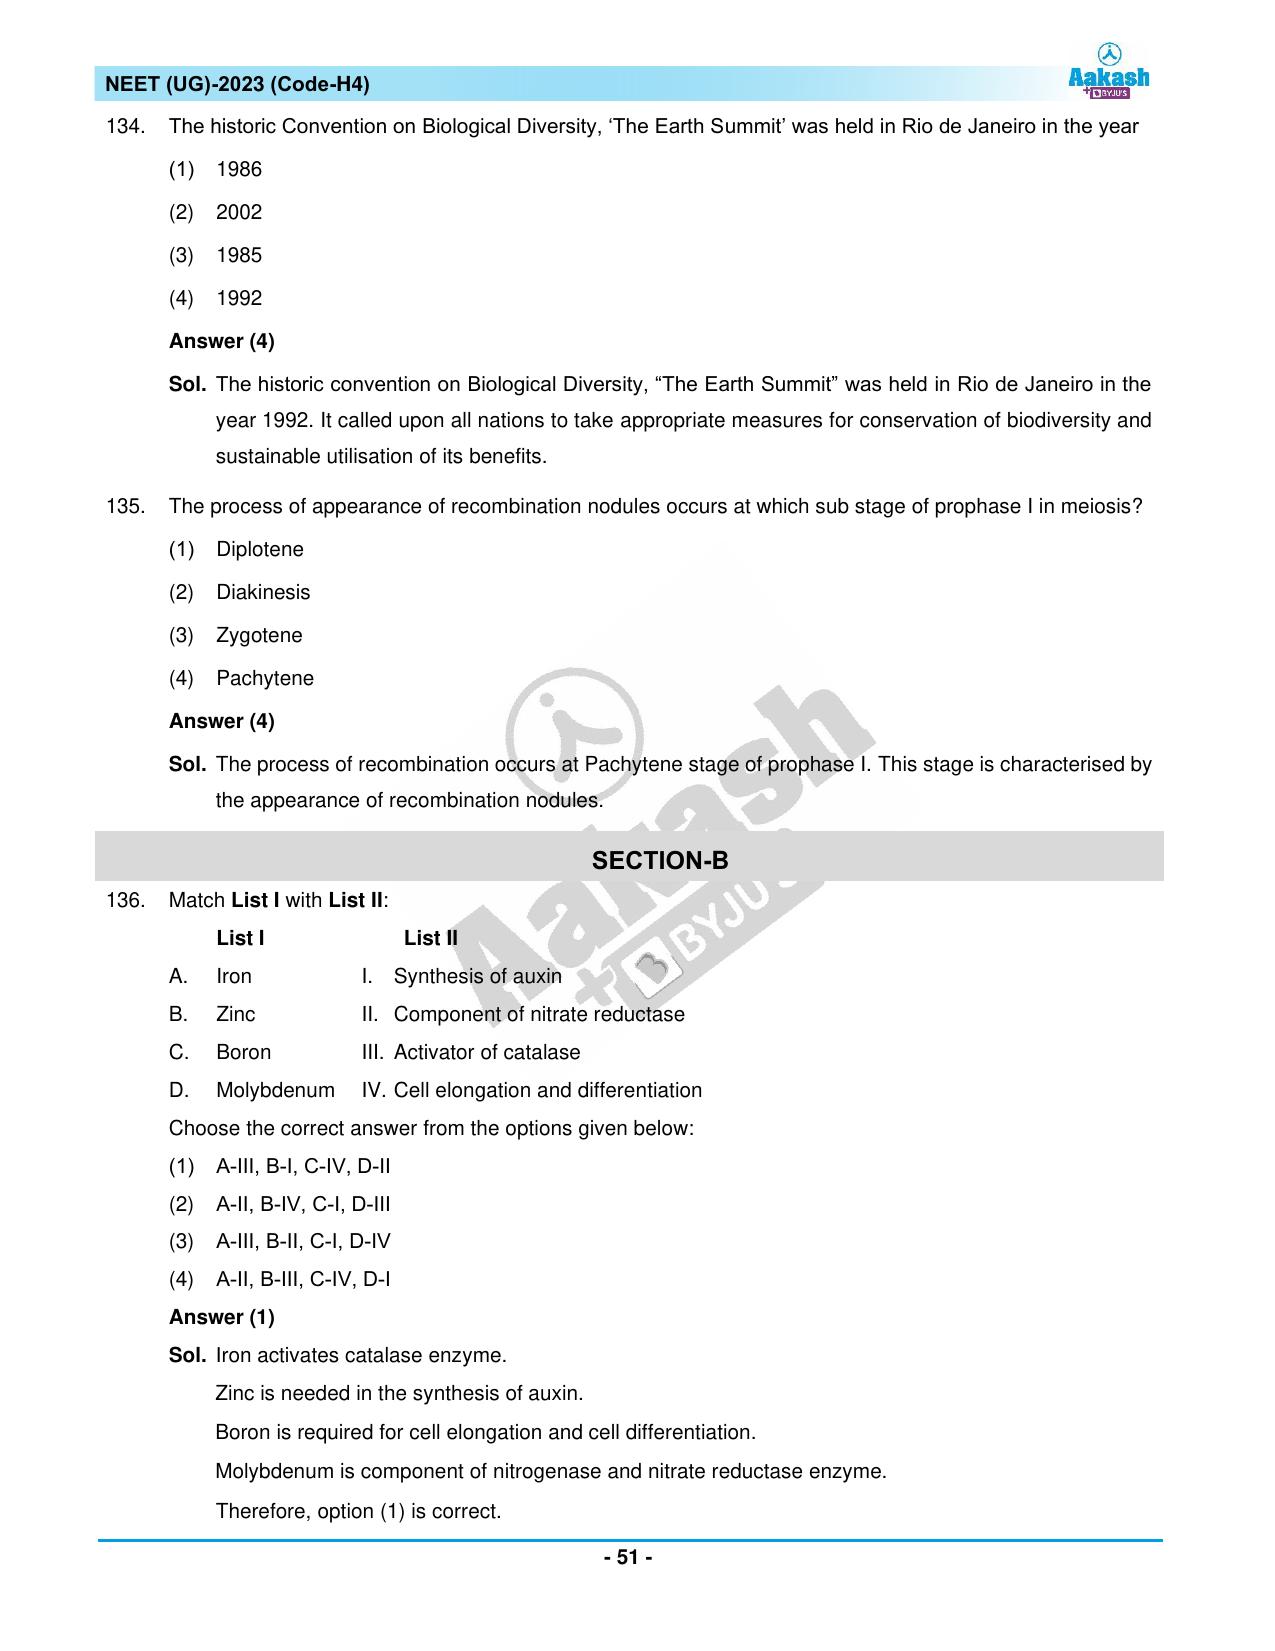 NEET 2023 Question Paper H4 - Page 51